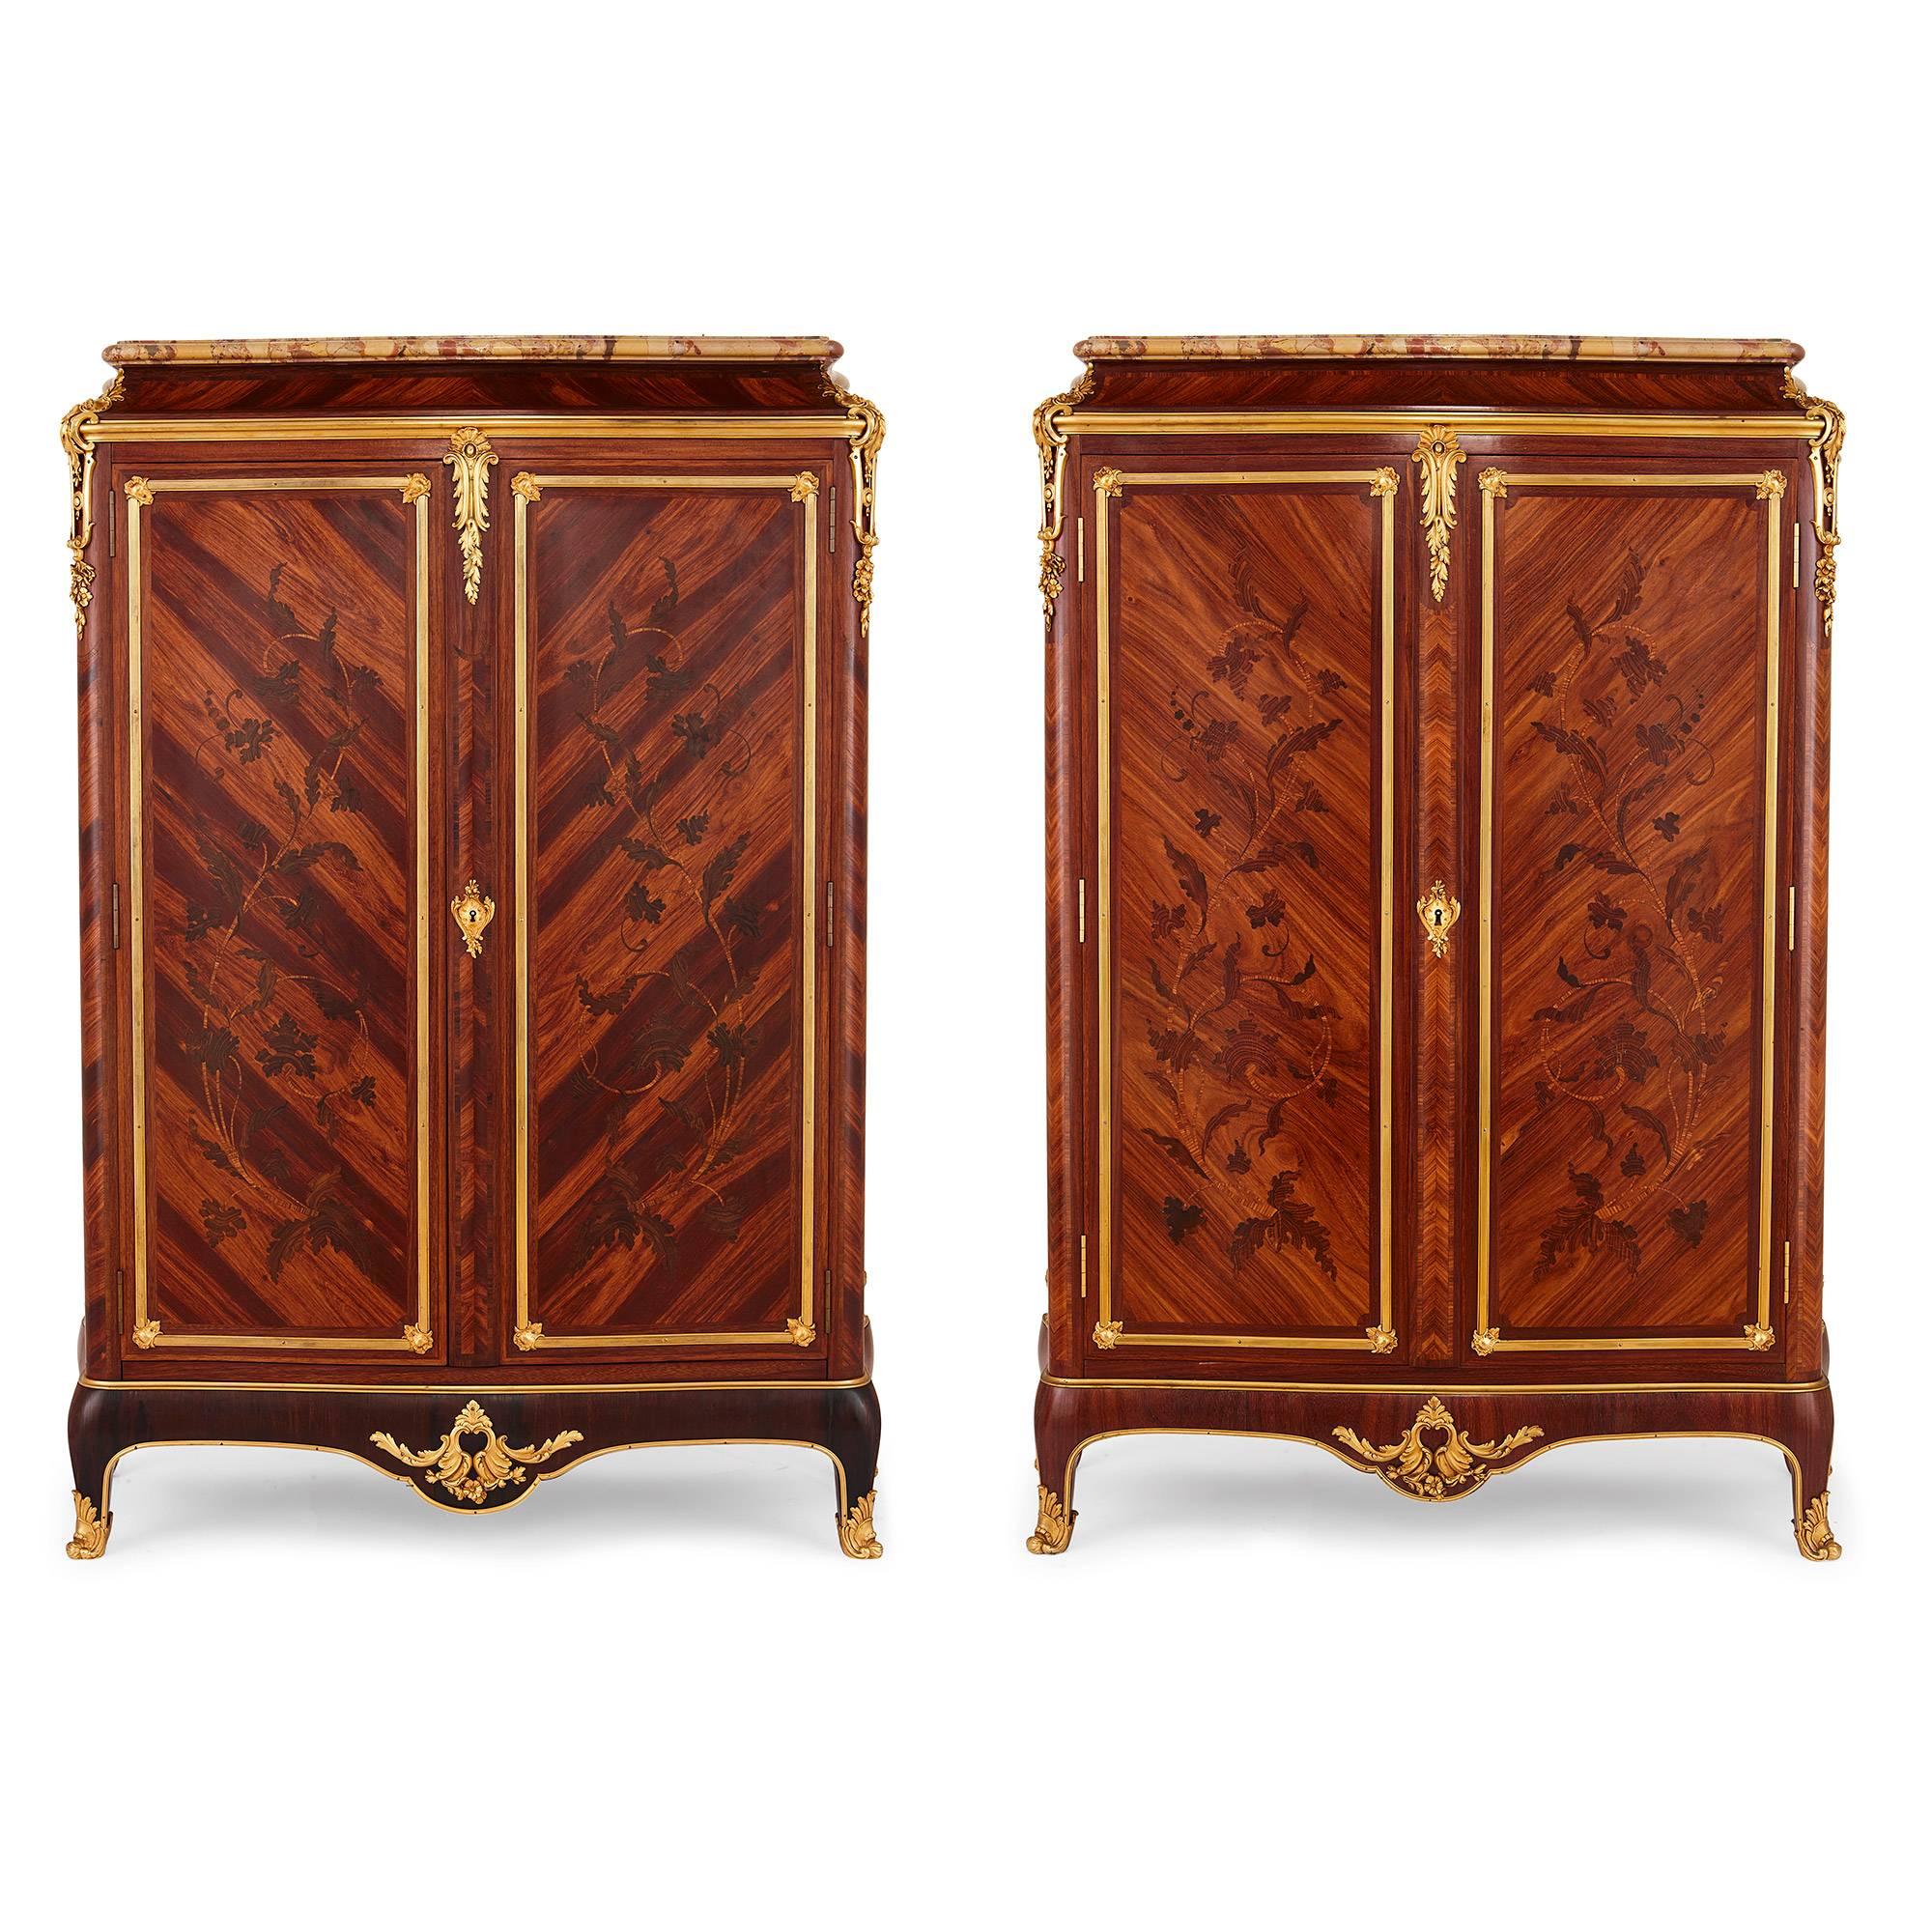 Gervais Durand was an exceptional furniture maker of the later 19th century, known especially for his reproductions of 18th Century works, but also responsible for some strikingly original designs. These cabinets display some of his best work. In